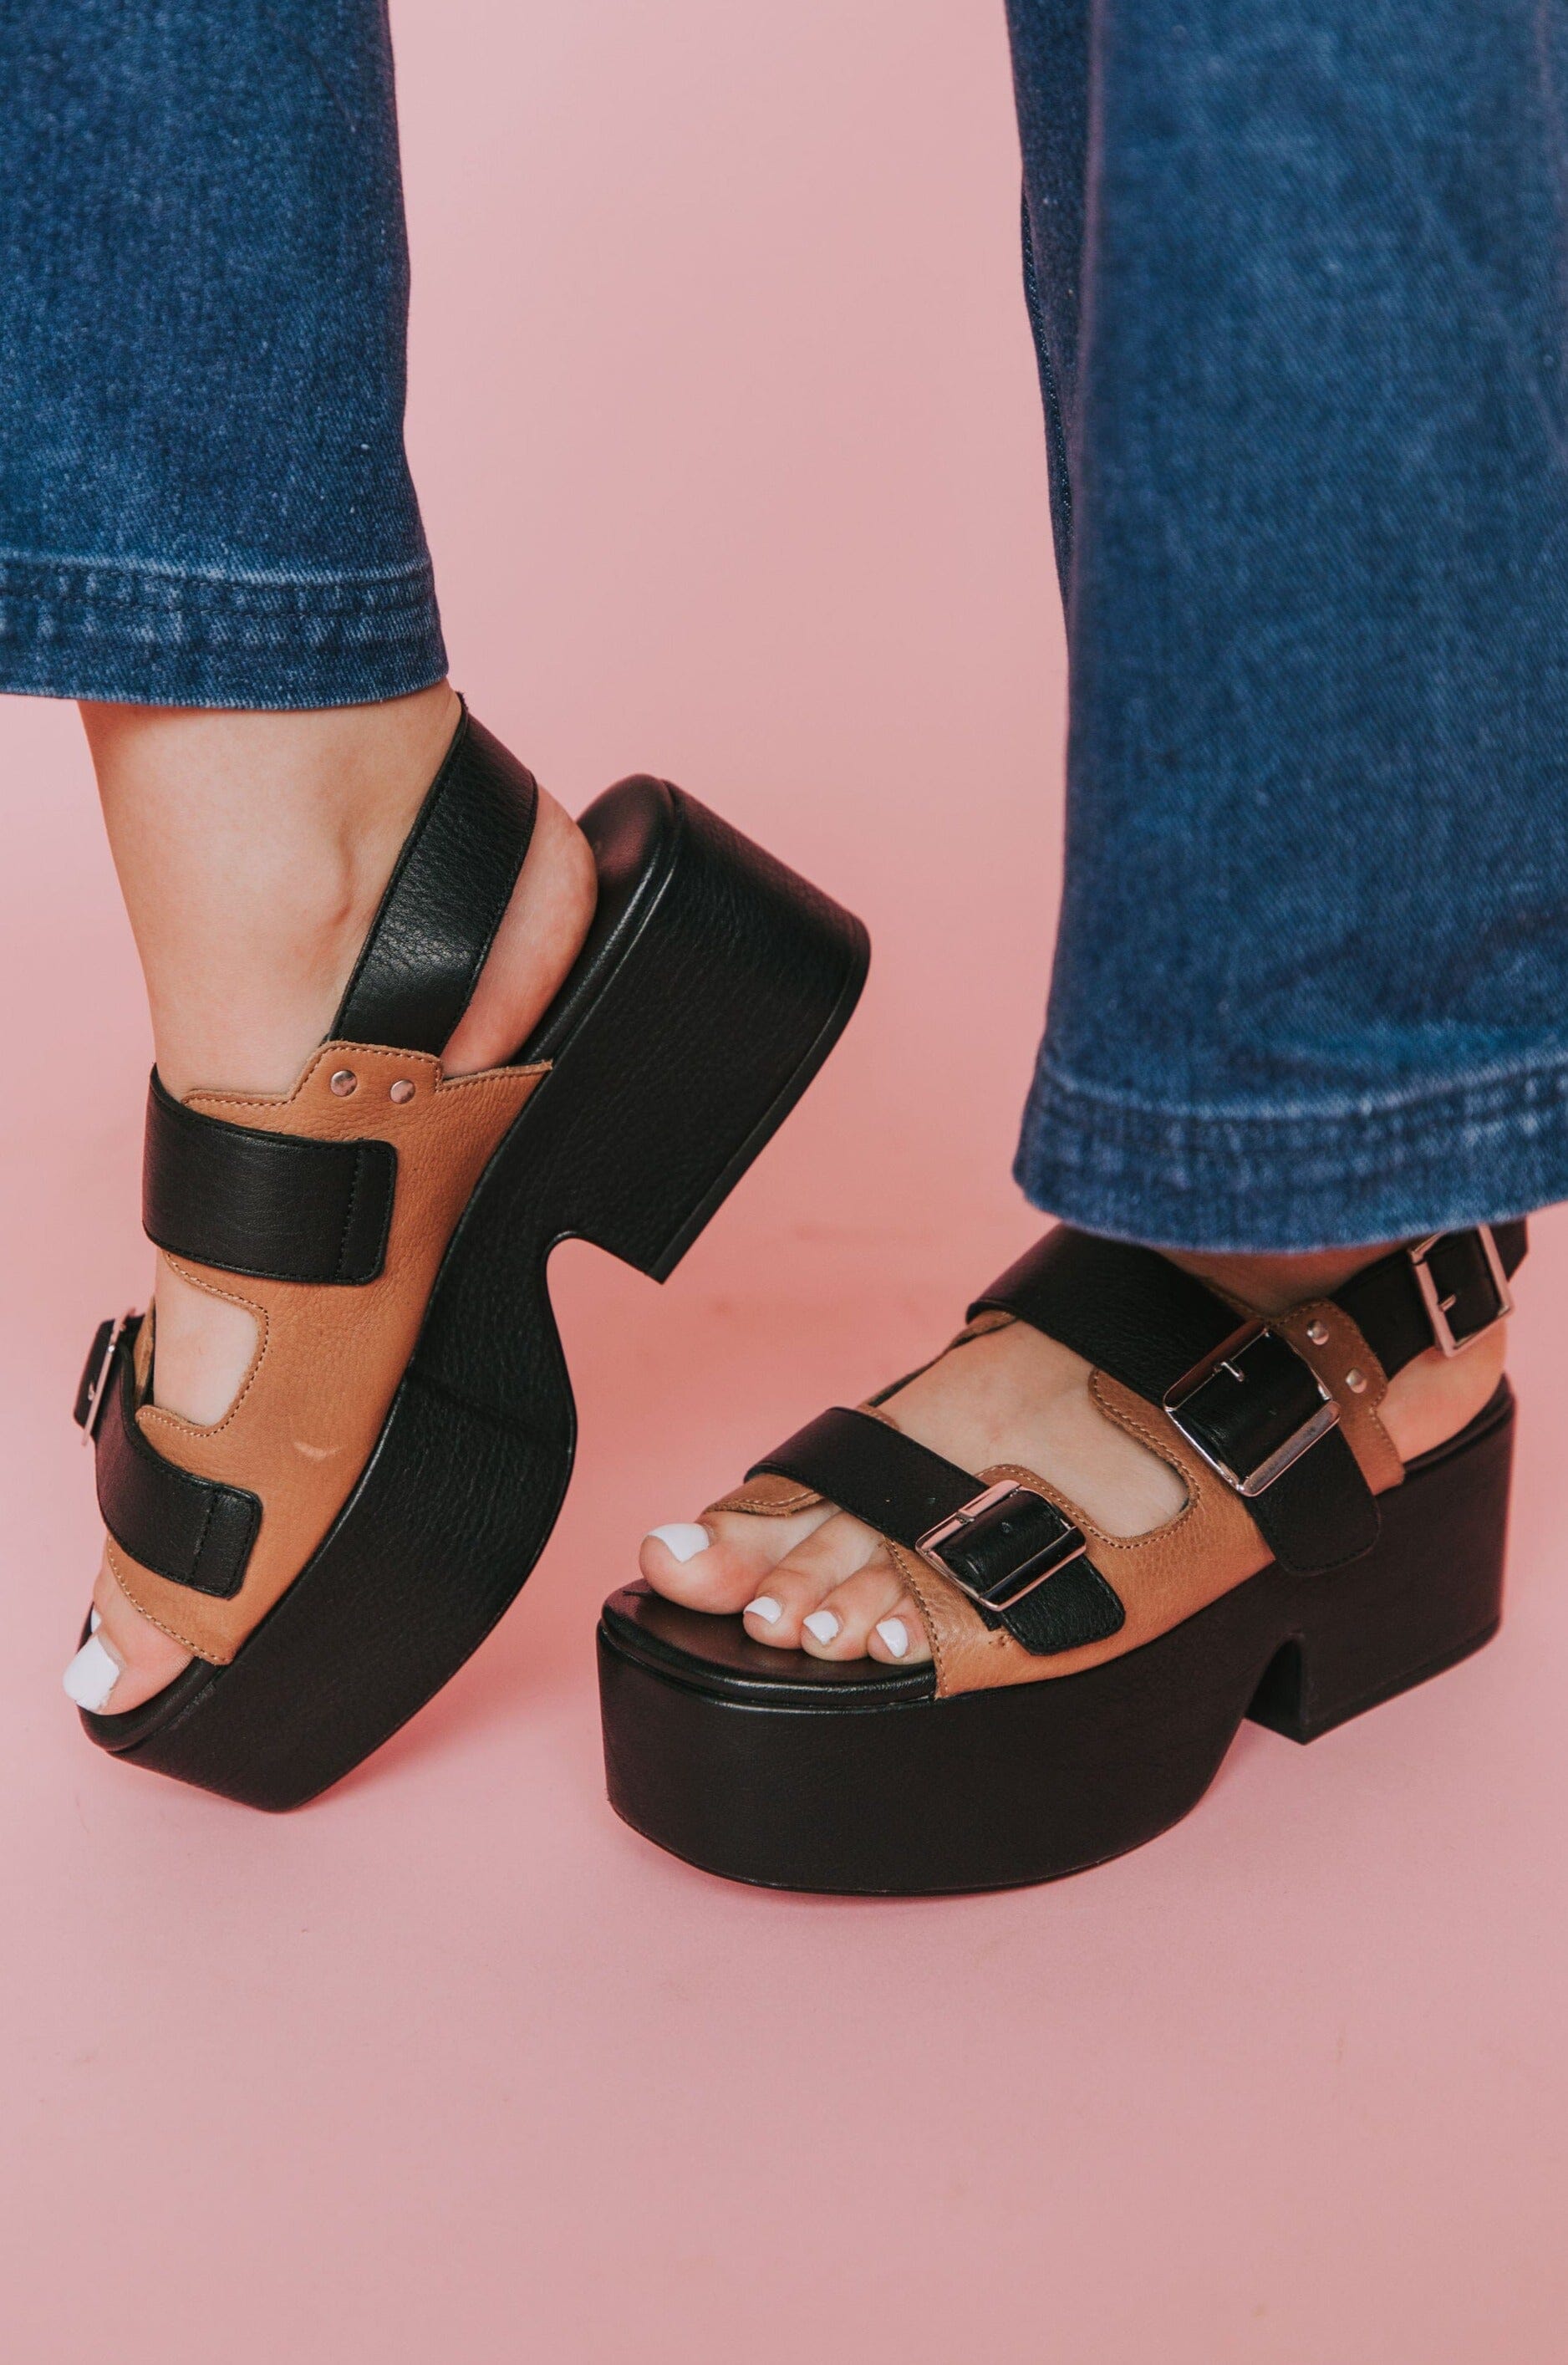 FREE PEOPLE - Follow Your Own Path Platform Sandals 